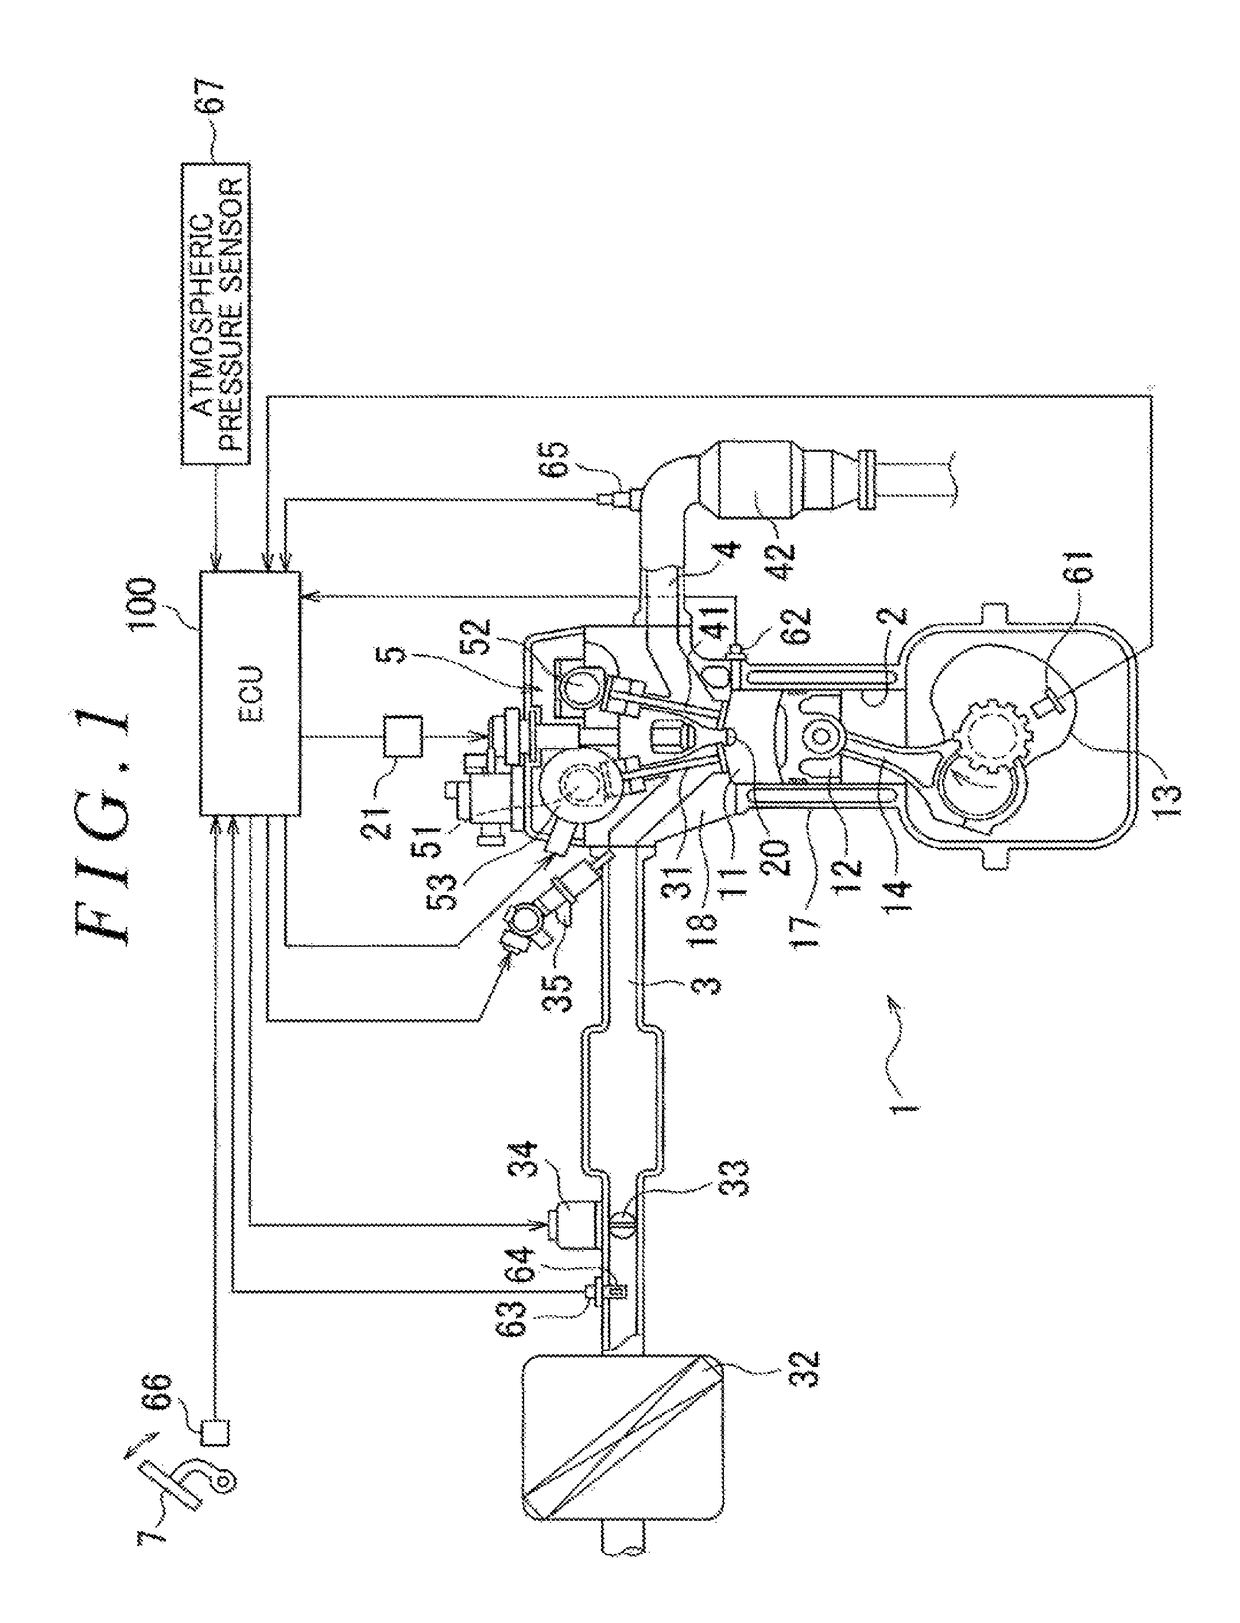 Failure diagnosis apparatus for diagnosing an insufficient output of an internal combustion engine